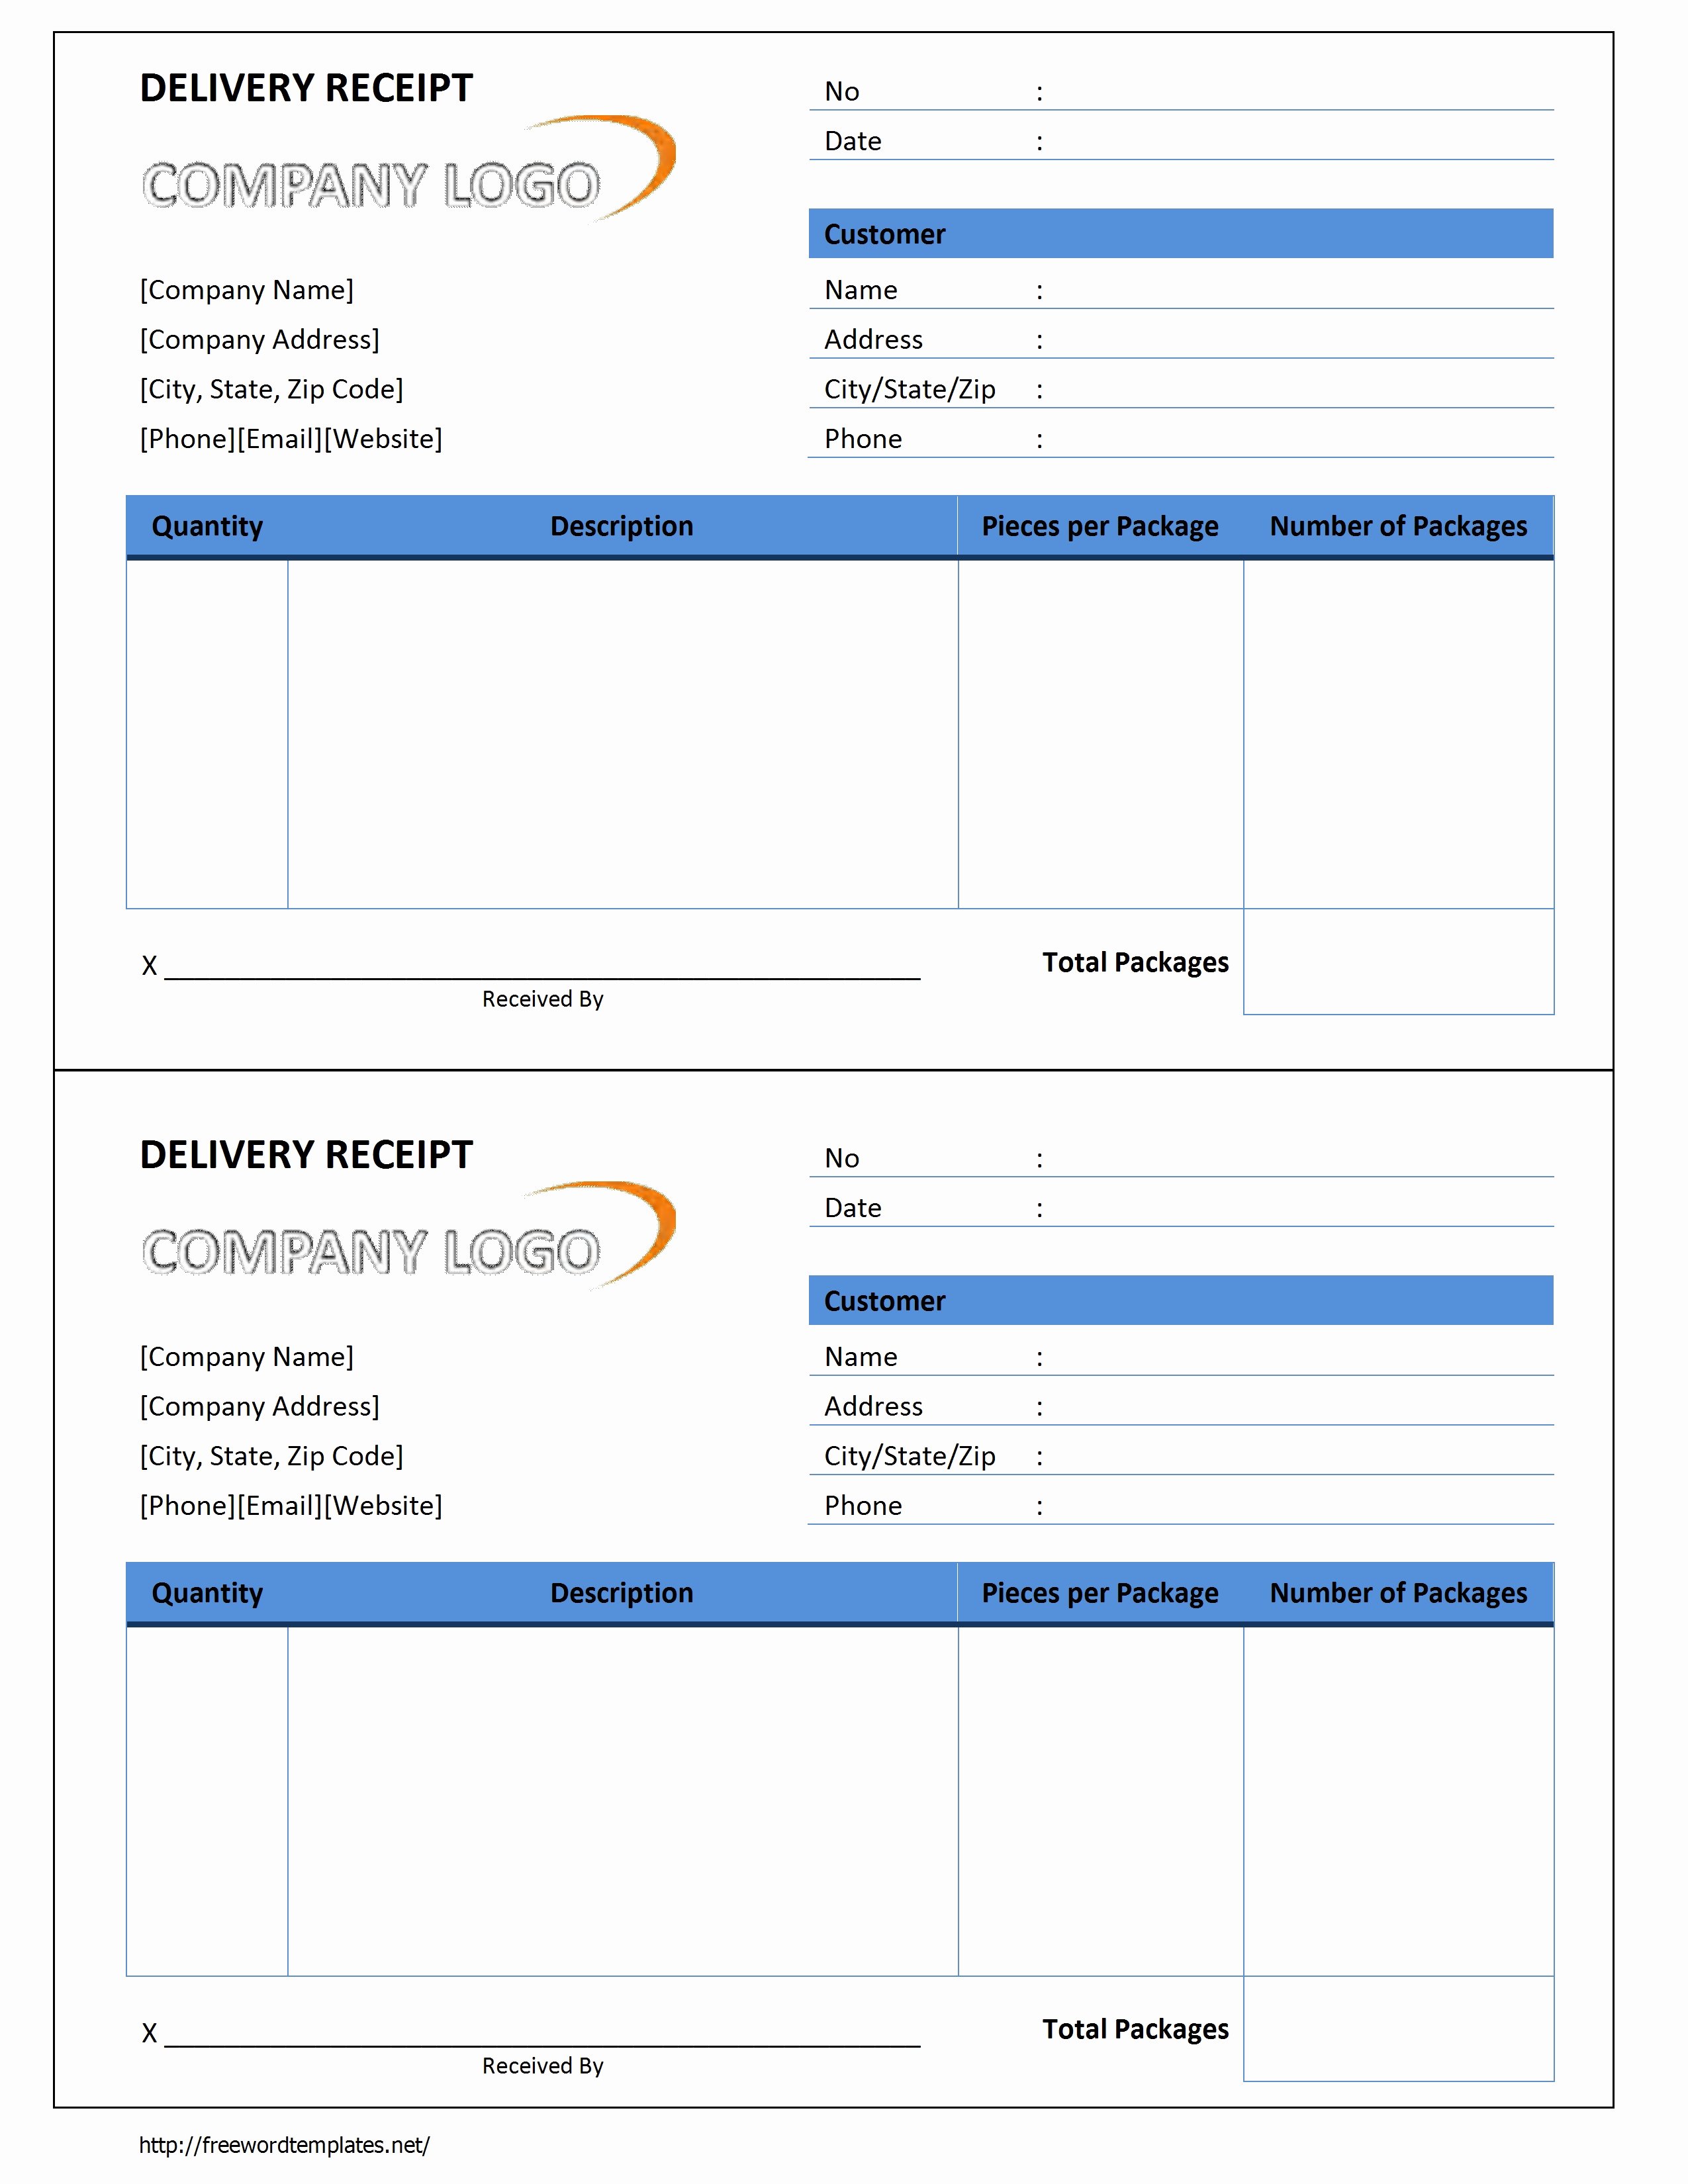 Product Received for Free New Delivery Receipt Template